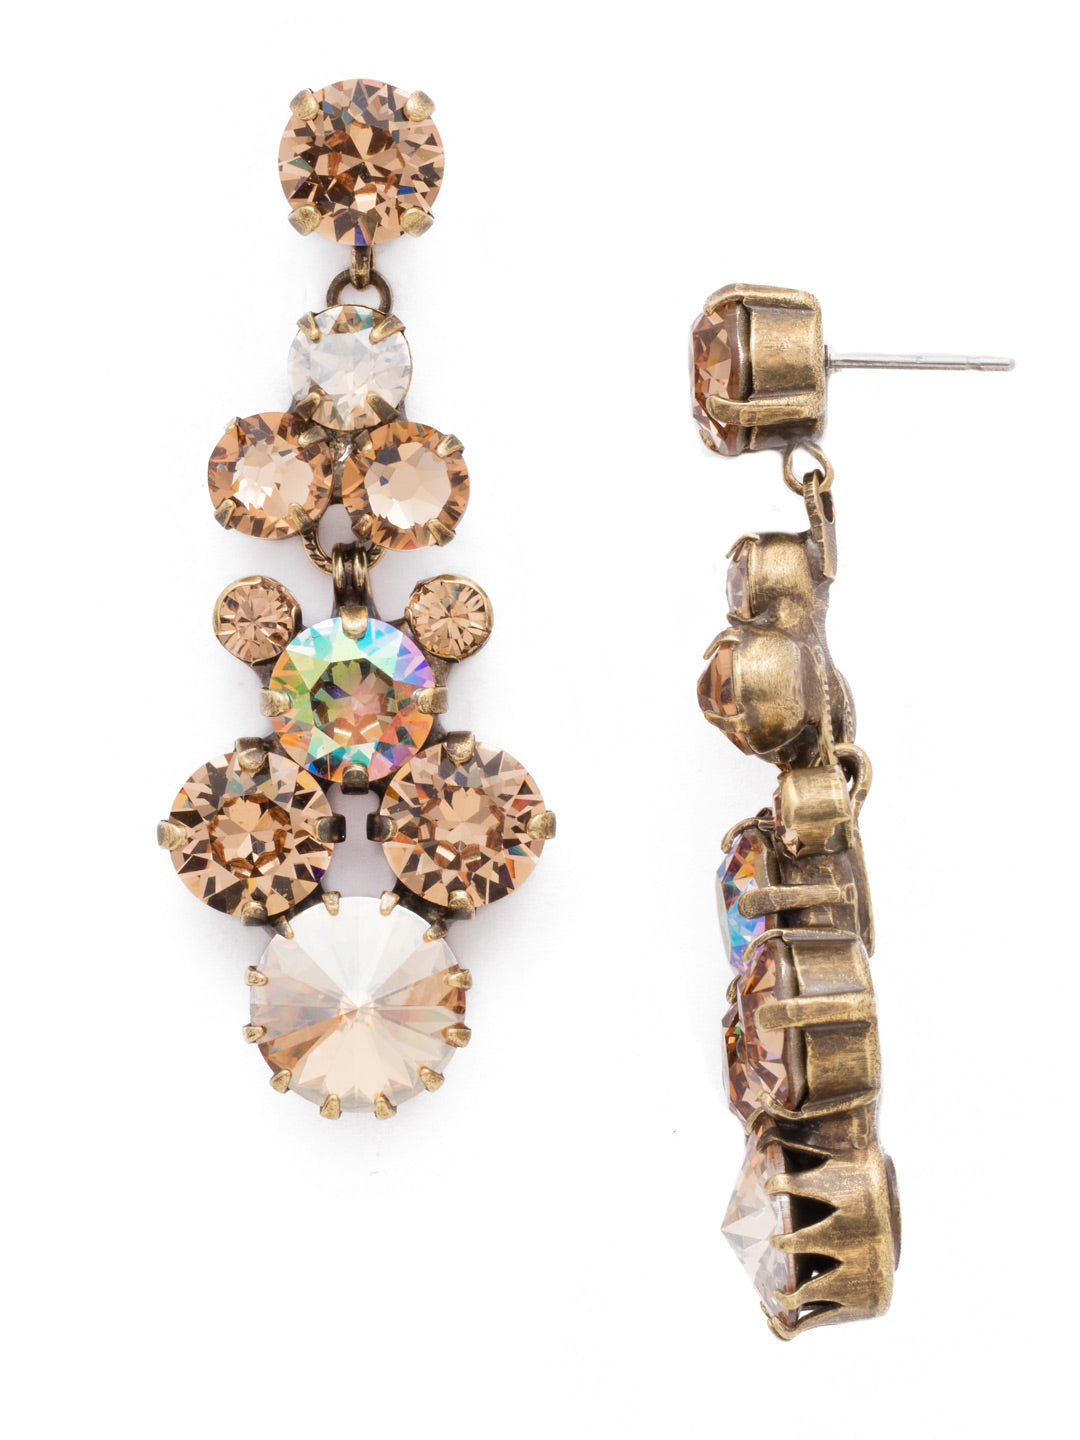 Well-Rounded Crystal Drop Dangle Earrings - EDH27AGNT - <p>Our Well-Rounded Crystal Drop Earring features an array of round crystals cascading from a post. Crystal clusters form this exquisite earring for a magnificent statement. From Sorrelli's Neutral Territory collection in our Antique Gold-tone finish.</p>